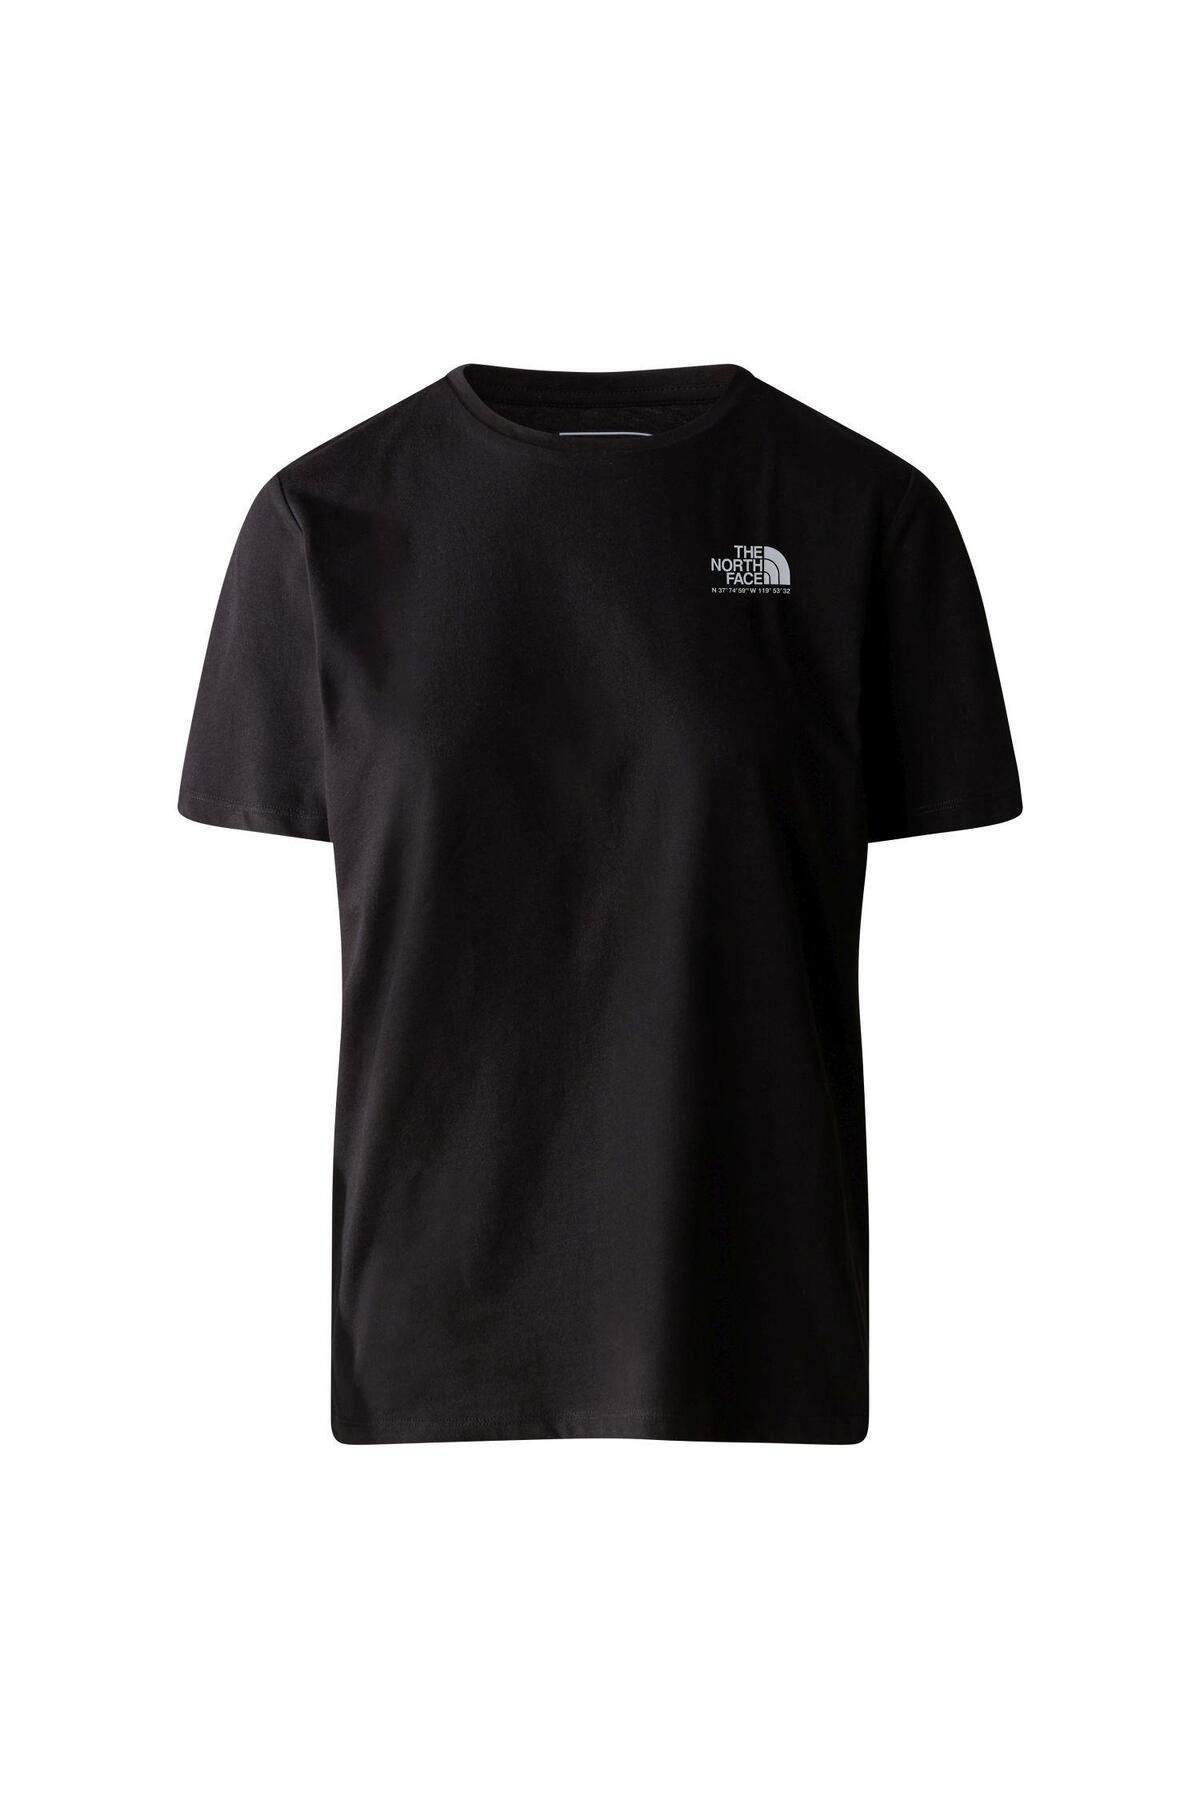 The North Face W FOUNDATION GRAPHIC TEE - EU  T-Shirt NF0A86XNKY41 Siyah-L